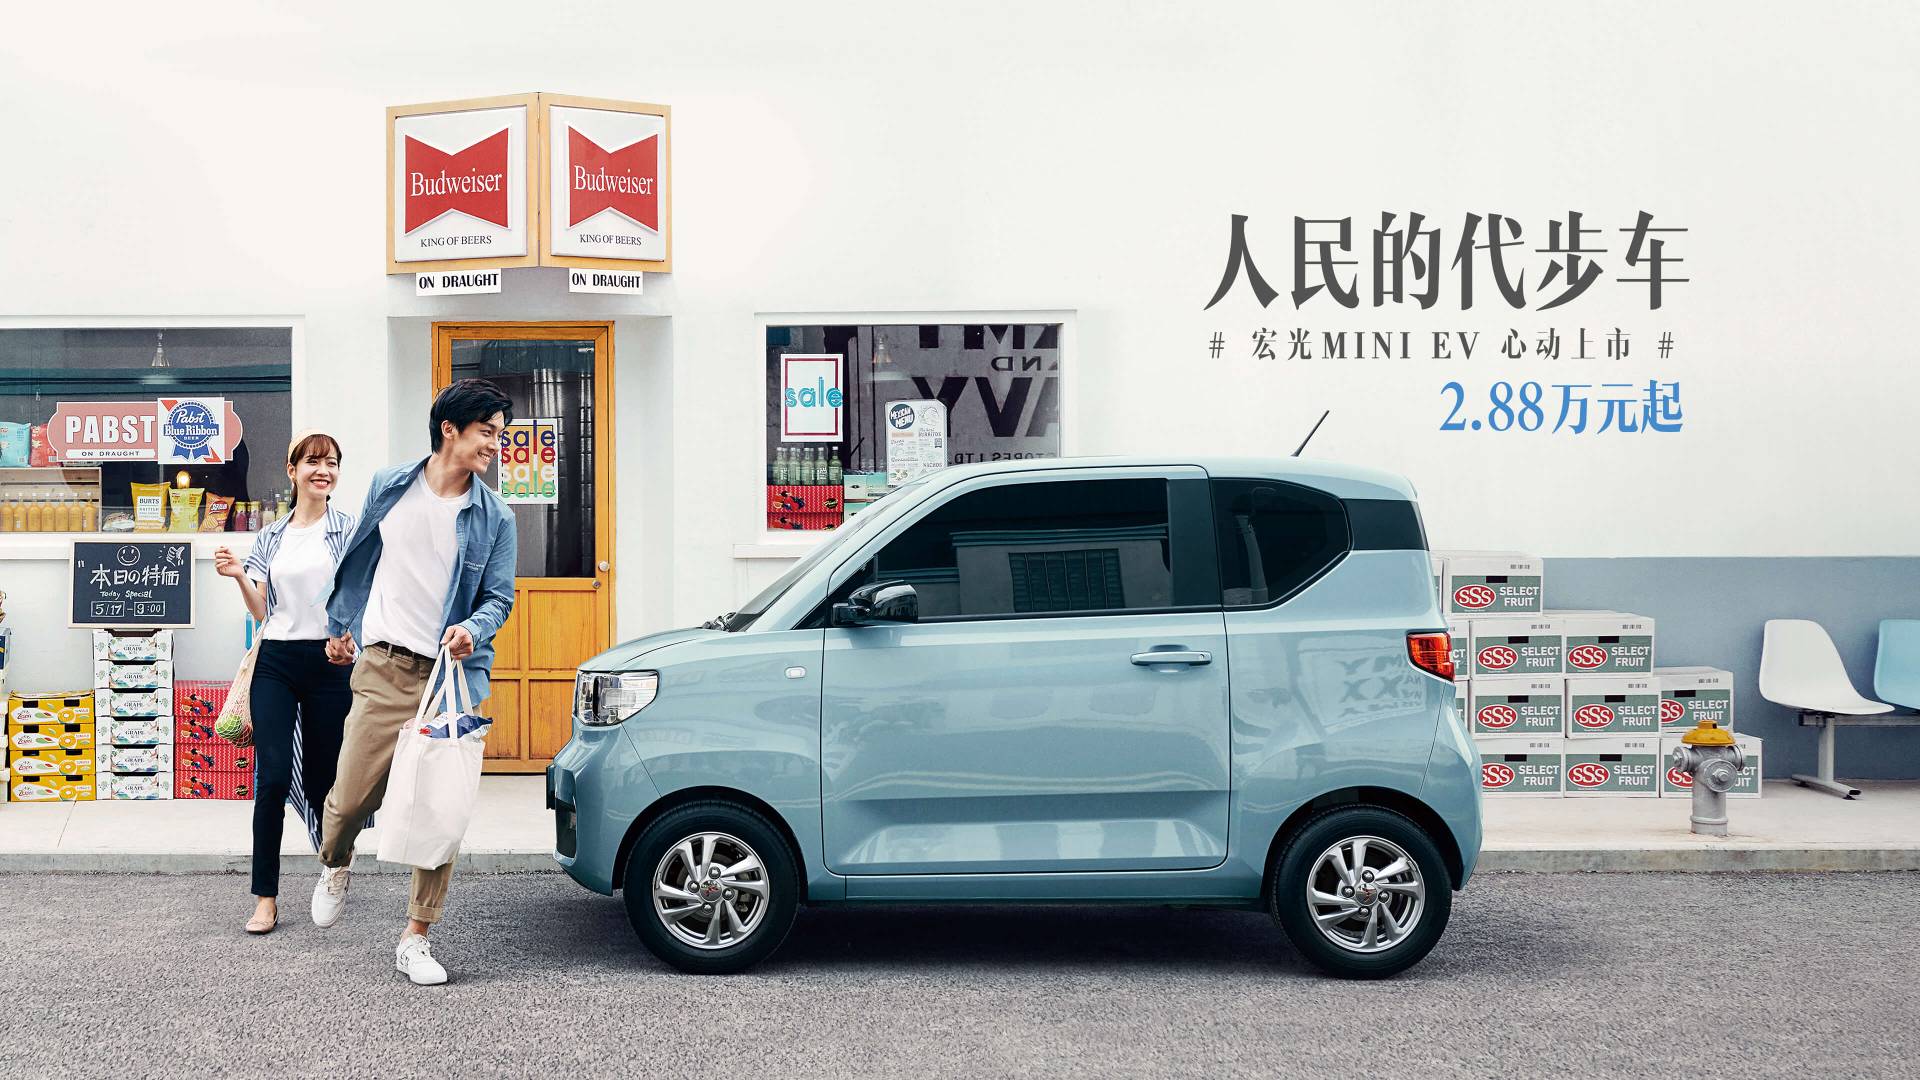 An Electric Microcar Is a Hit in China But the US Is Still